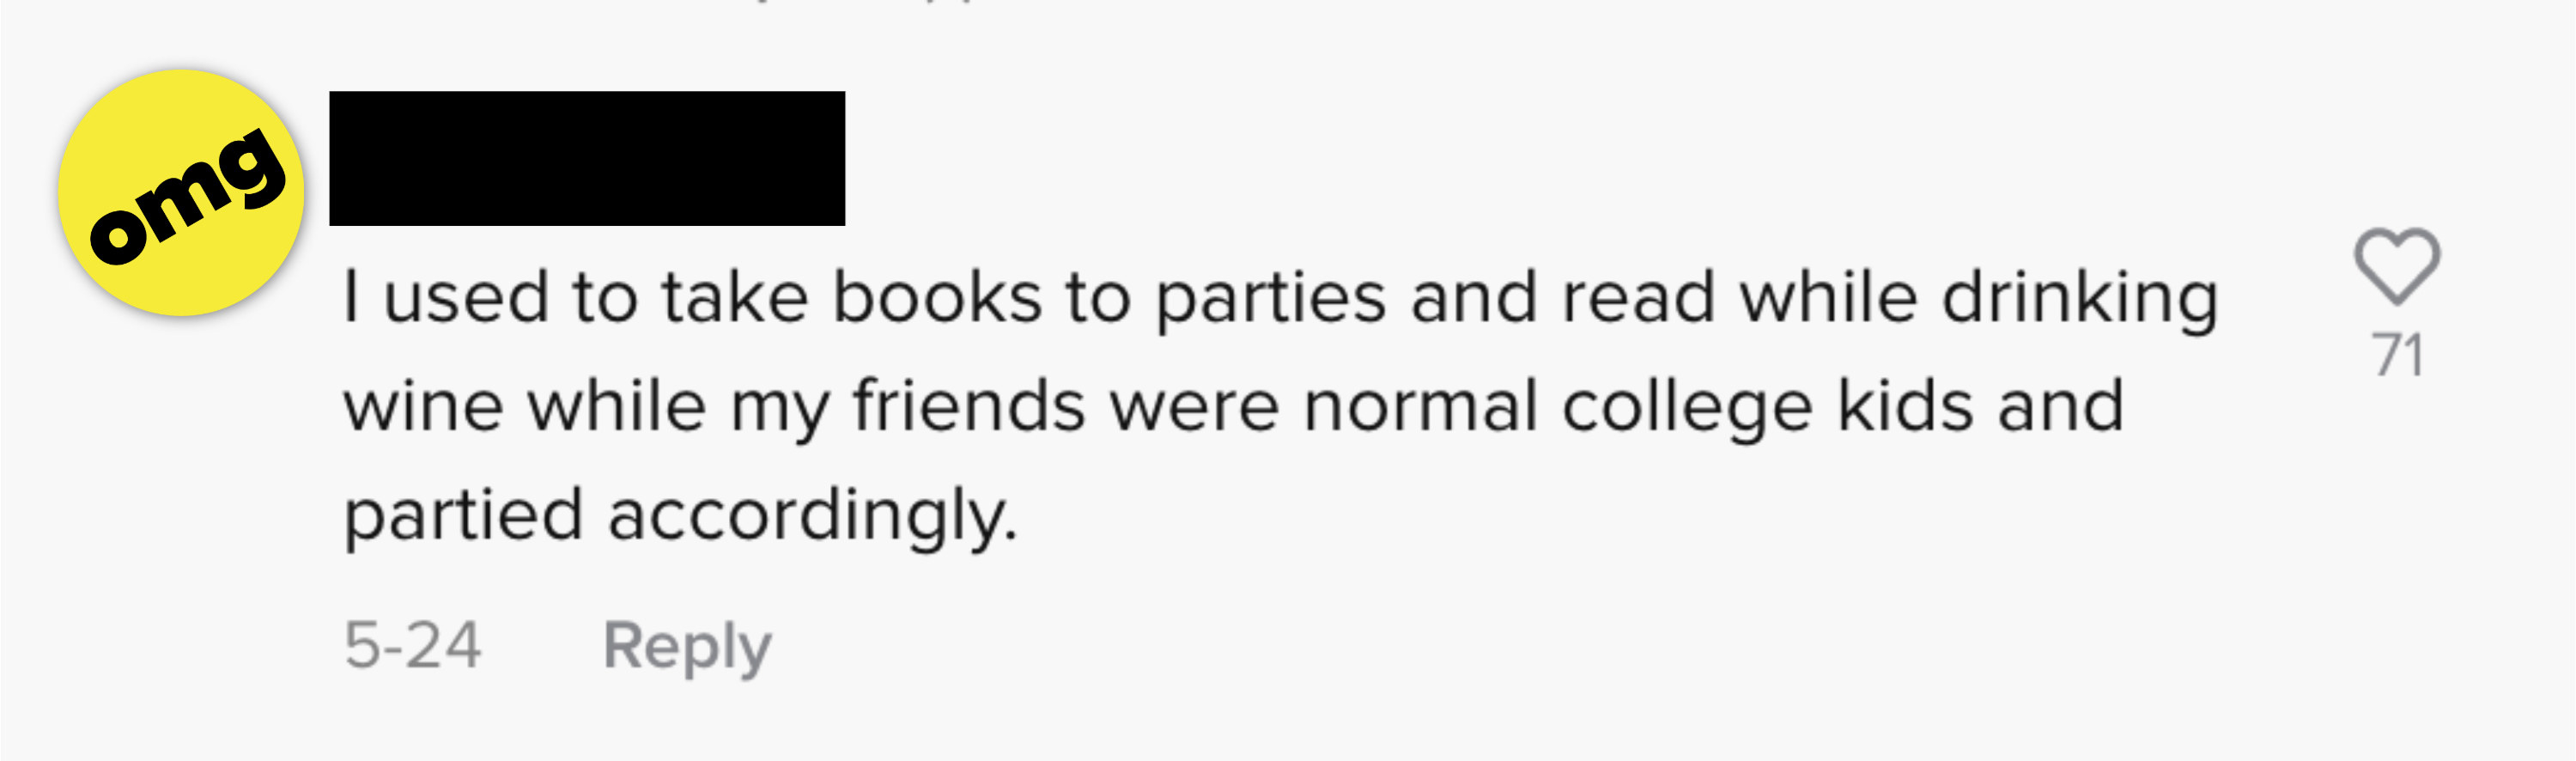 I used to take books to parties and read while drinking wine while my friends were normal college kids and partied accordingly